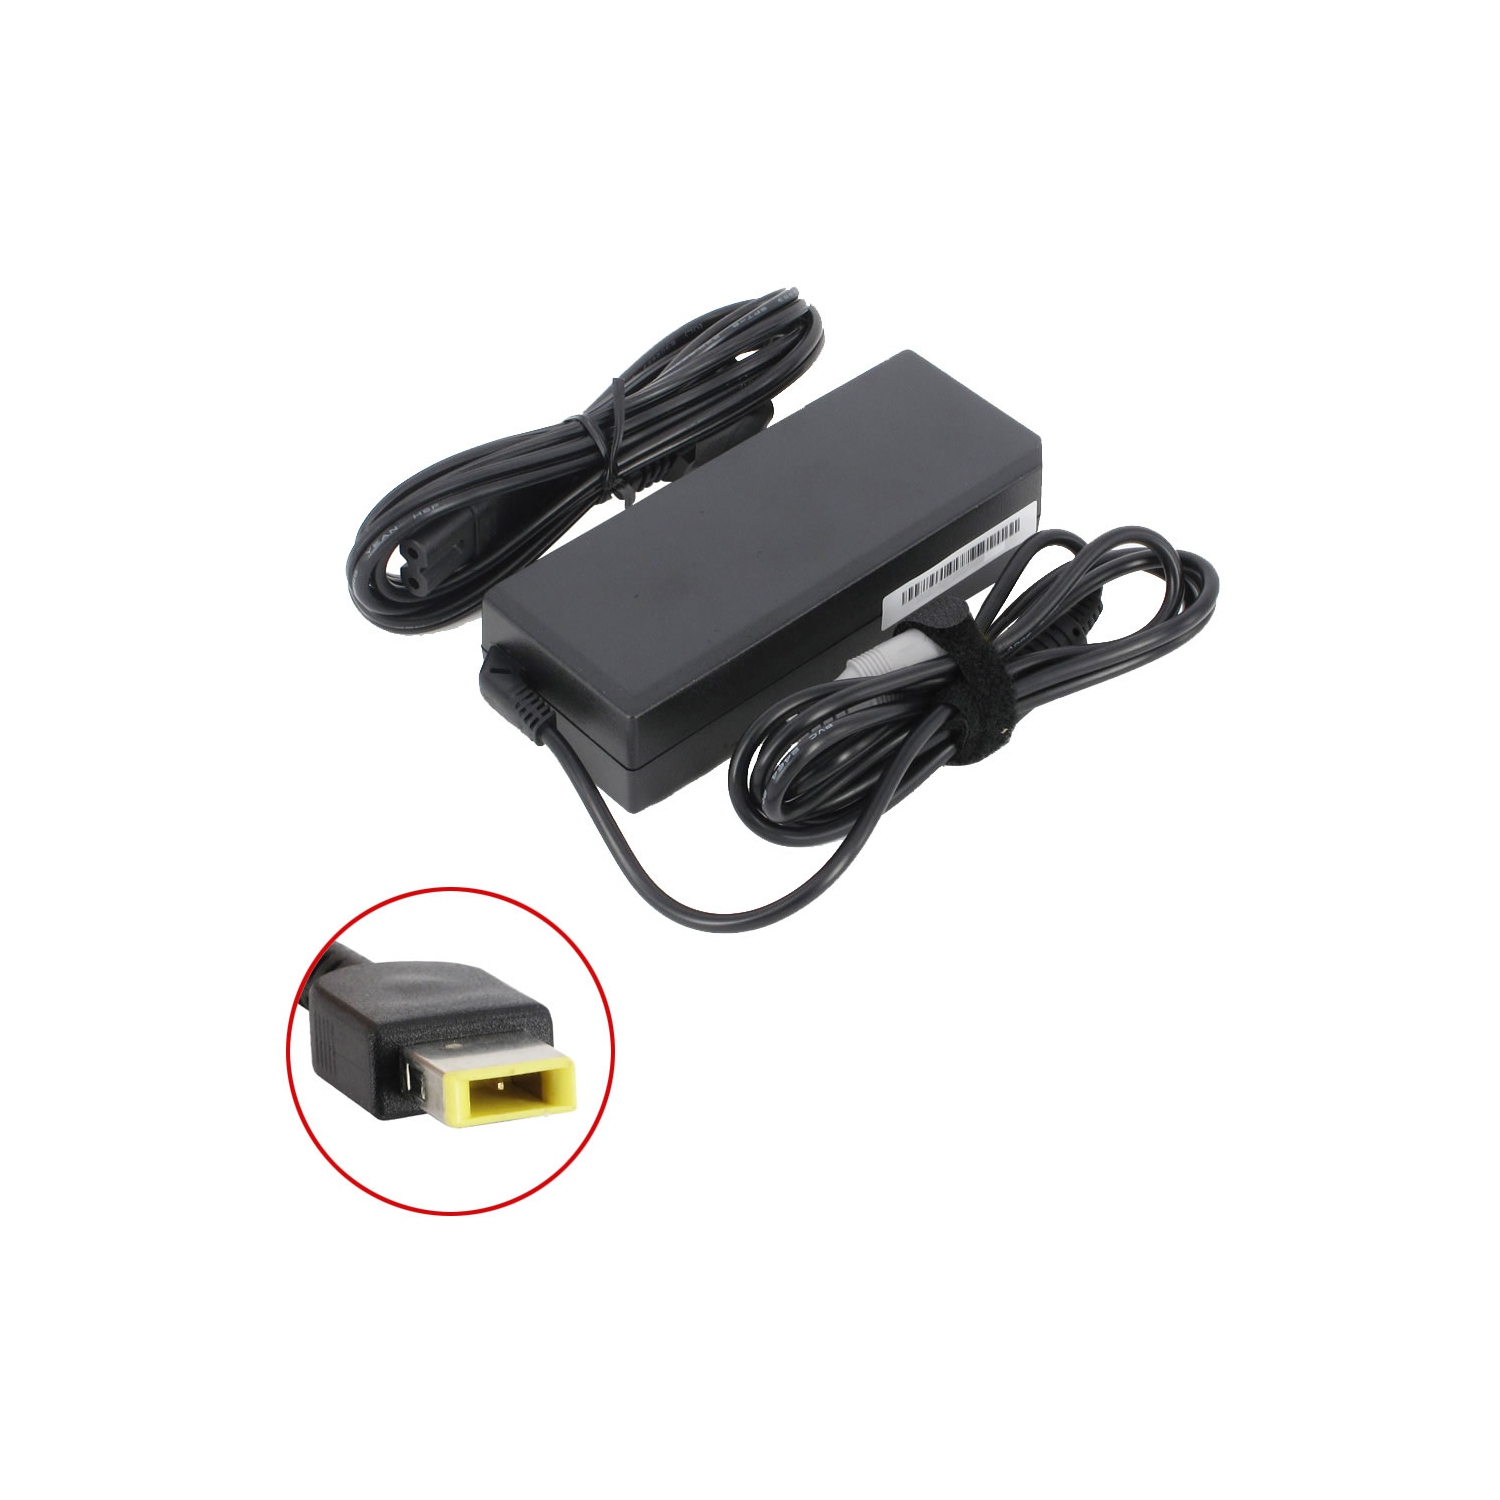 Brand New Laptop AC Adapter for Lenovo IdeaPad 500-15ISK 80NT0083CF, ADP-65XB A, 0B47481, 45N0293, 45N0482, PA-1650-37LF